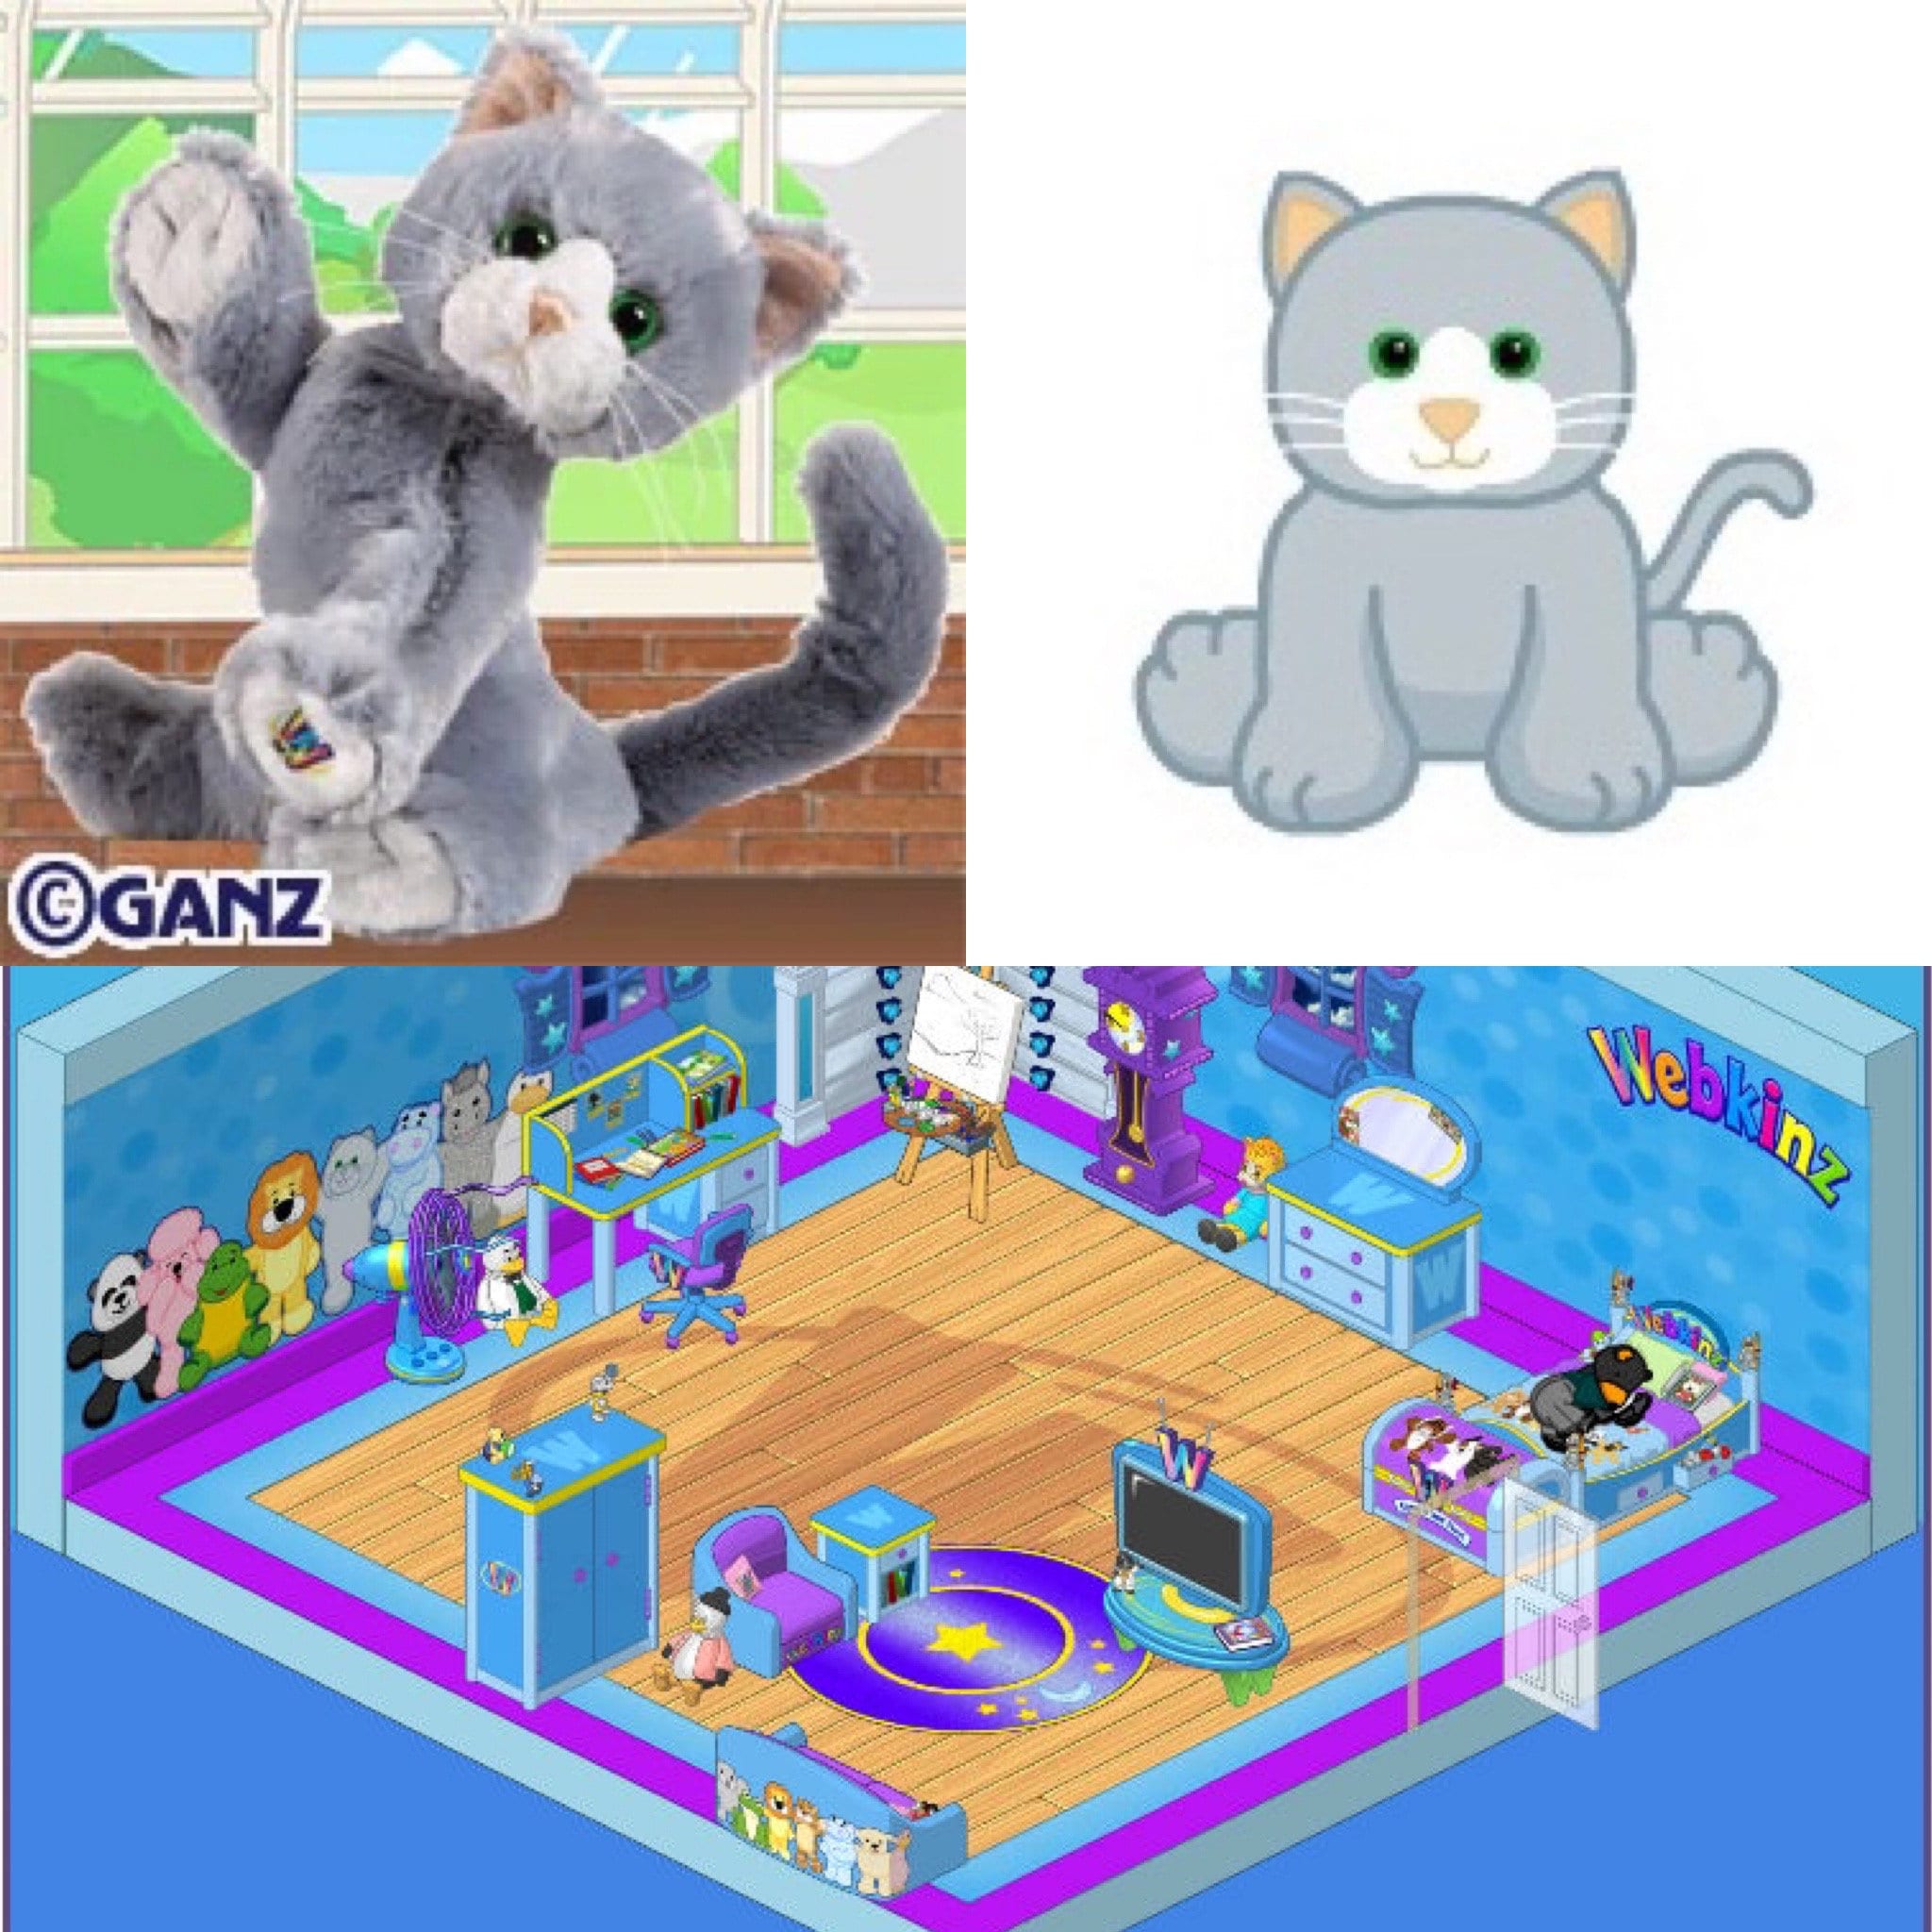 Webkinz Silversoft Cat Brand New With Sealed/Unused Code Tag SMOKE FREE HOME * 